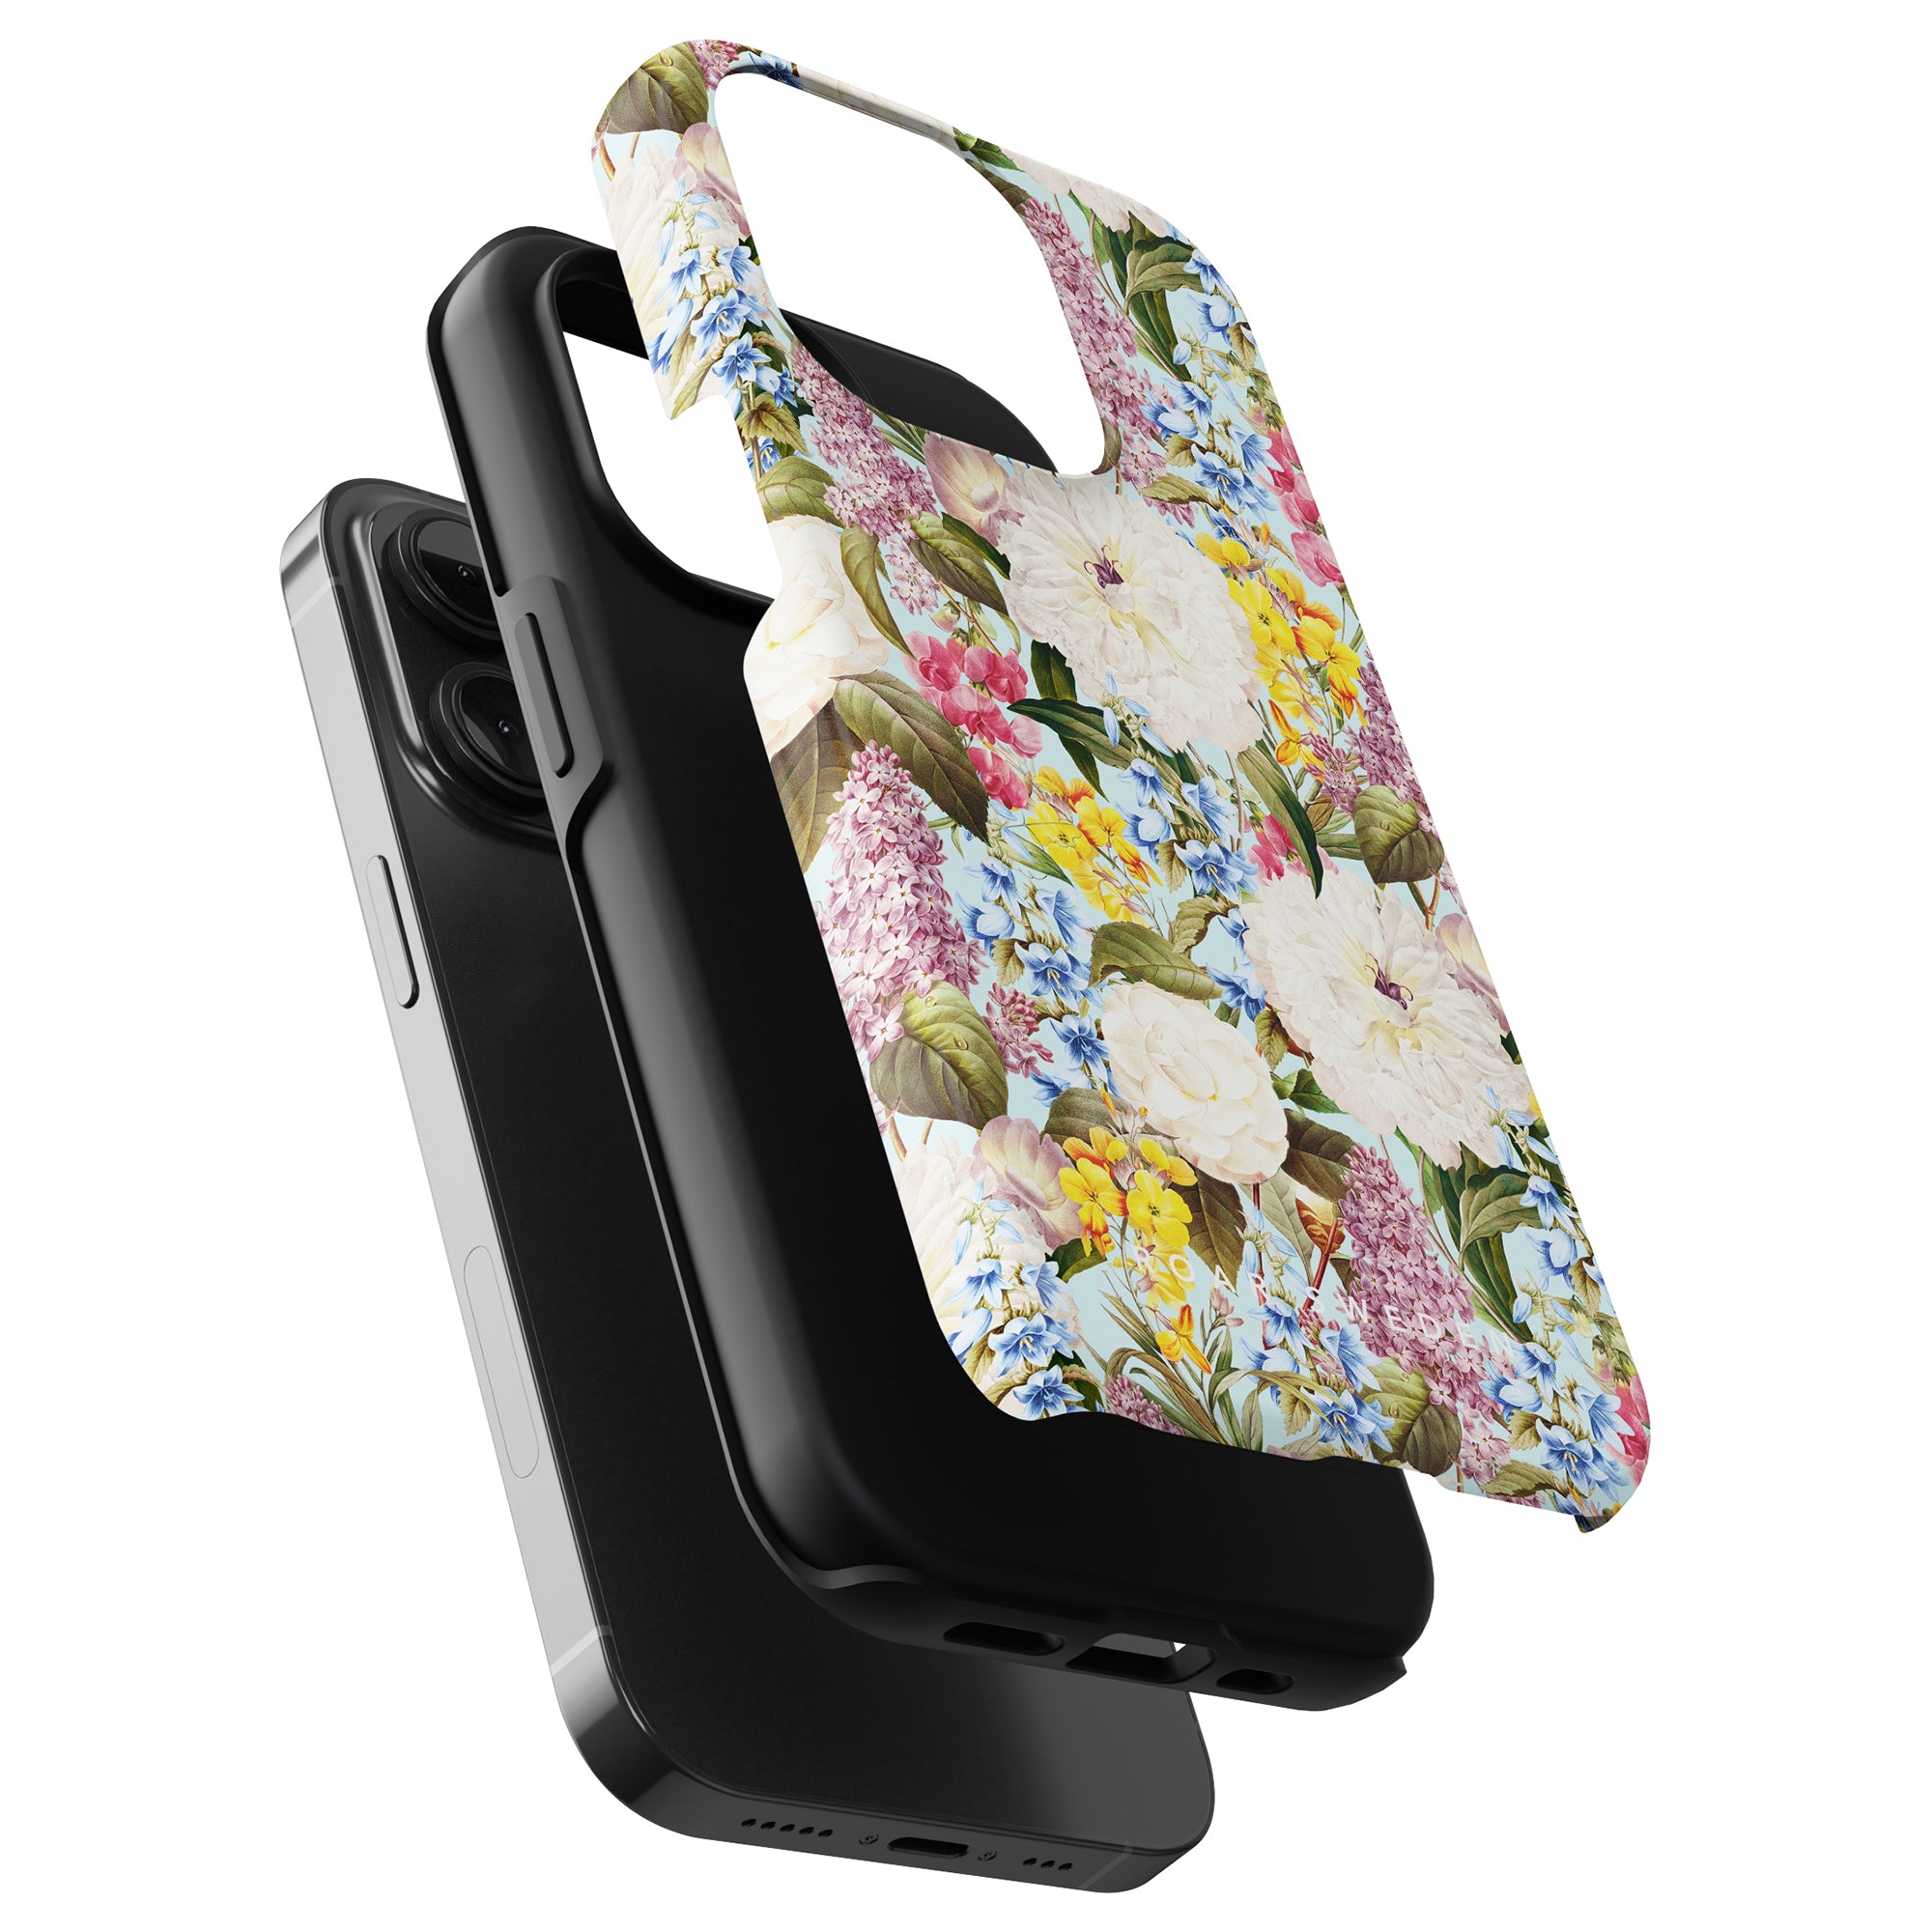 A stylish smartphone with a Fragrant Paradise - Tough Case and a floral-patterned phone grip attached to its back.